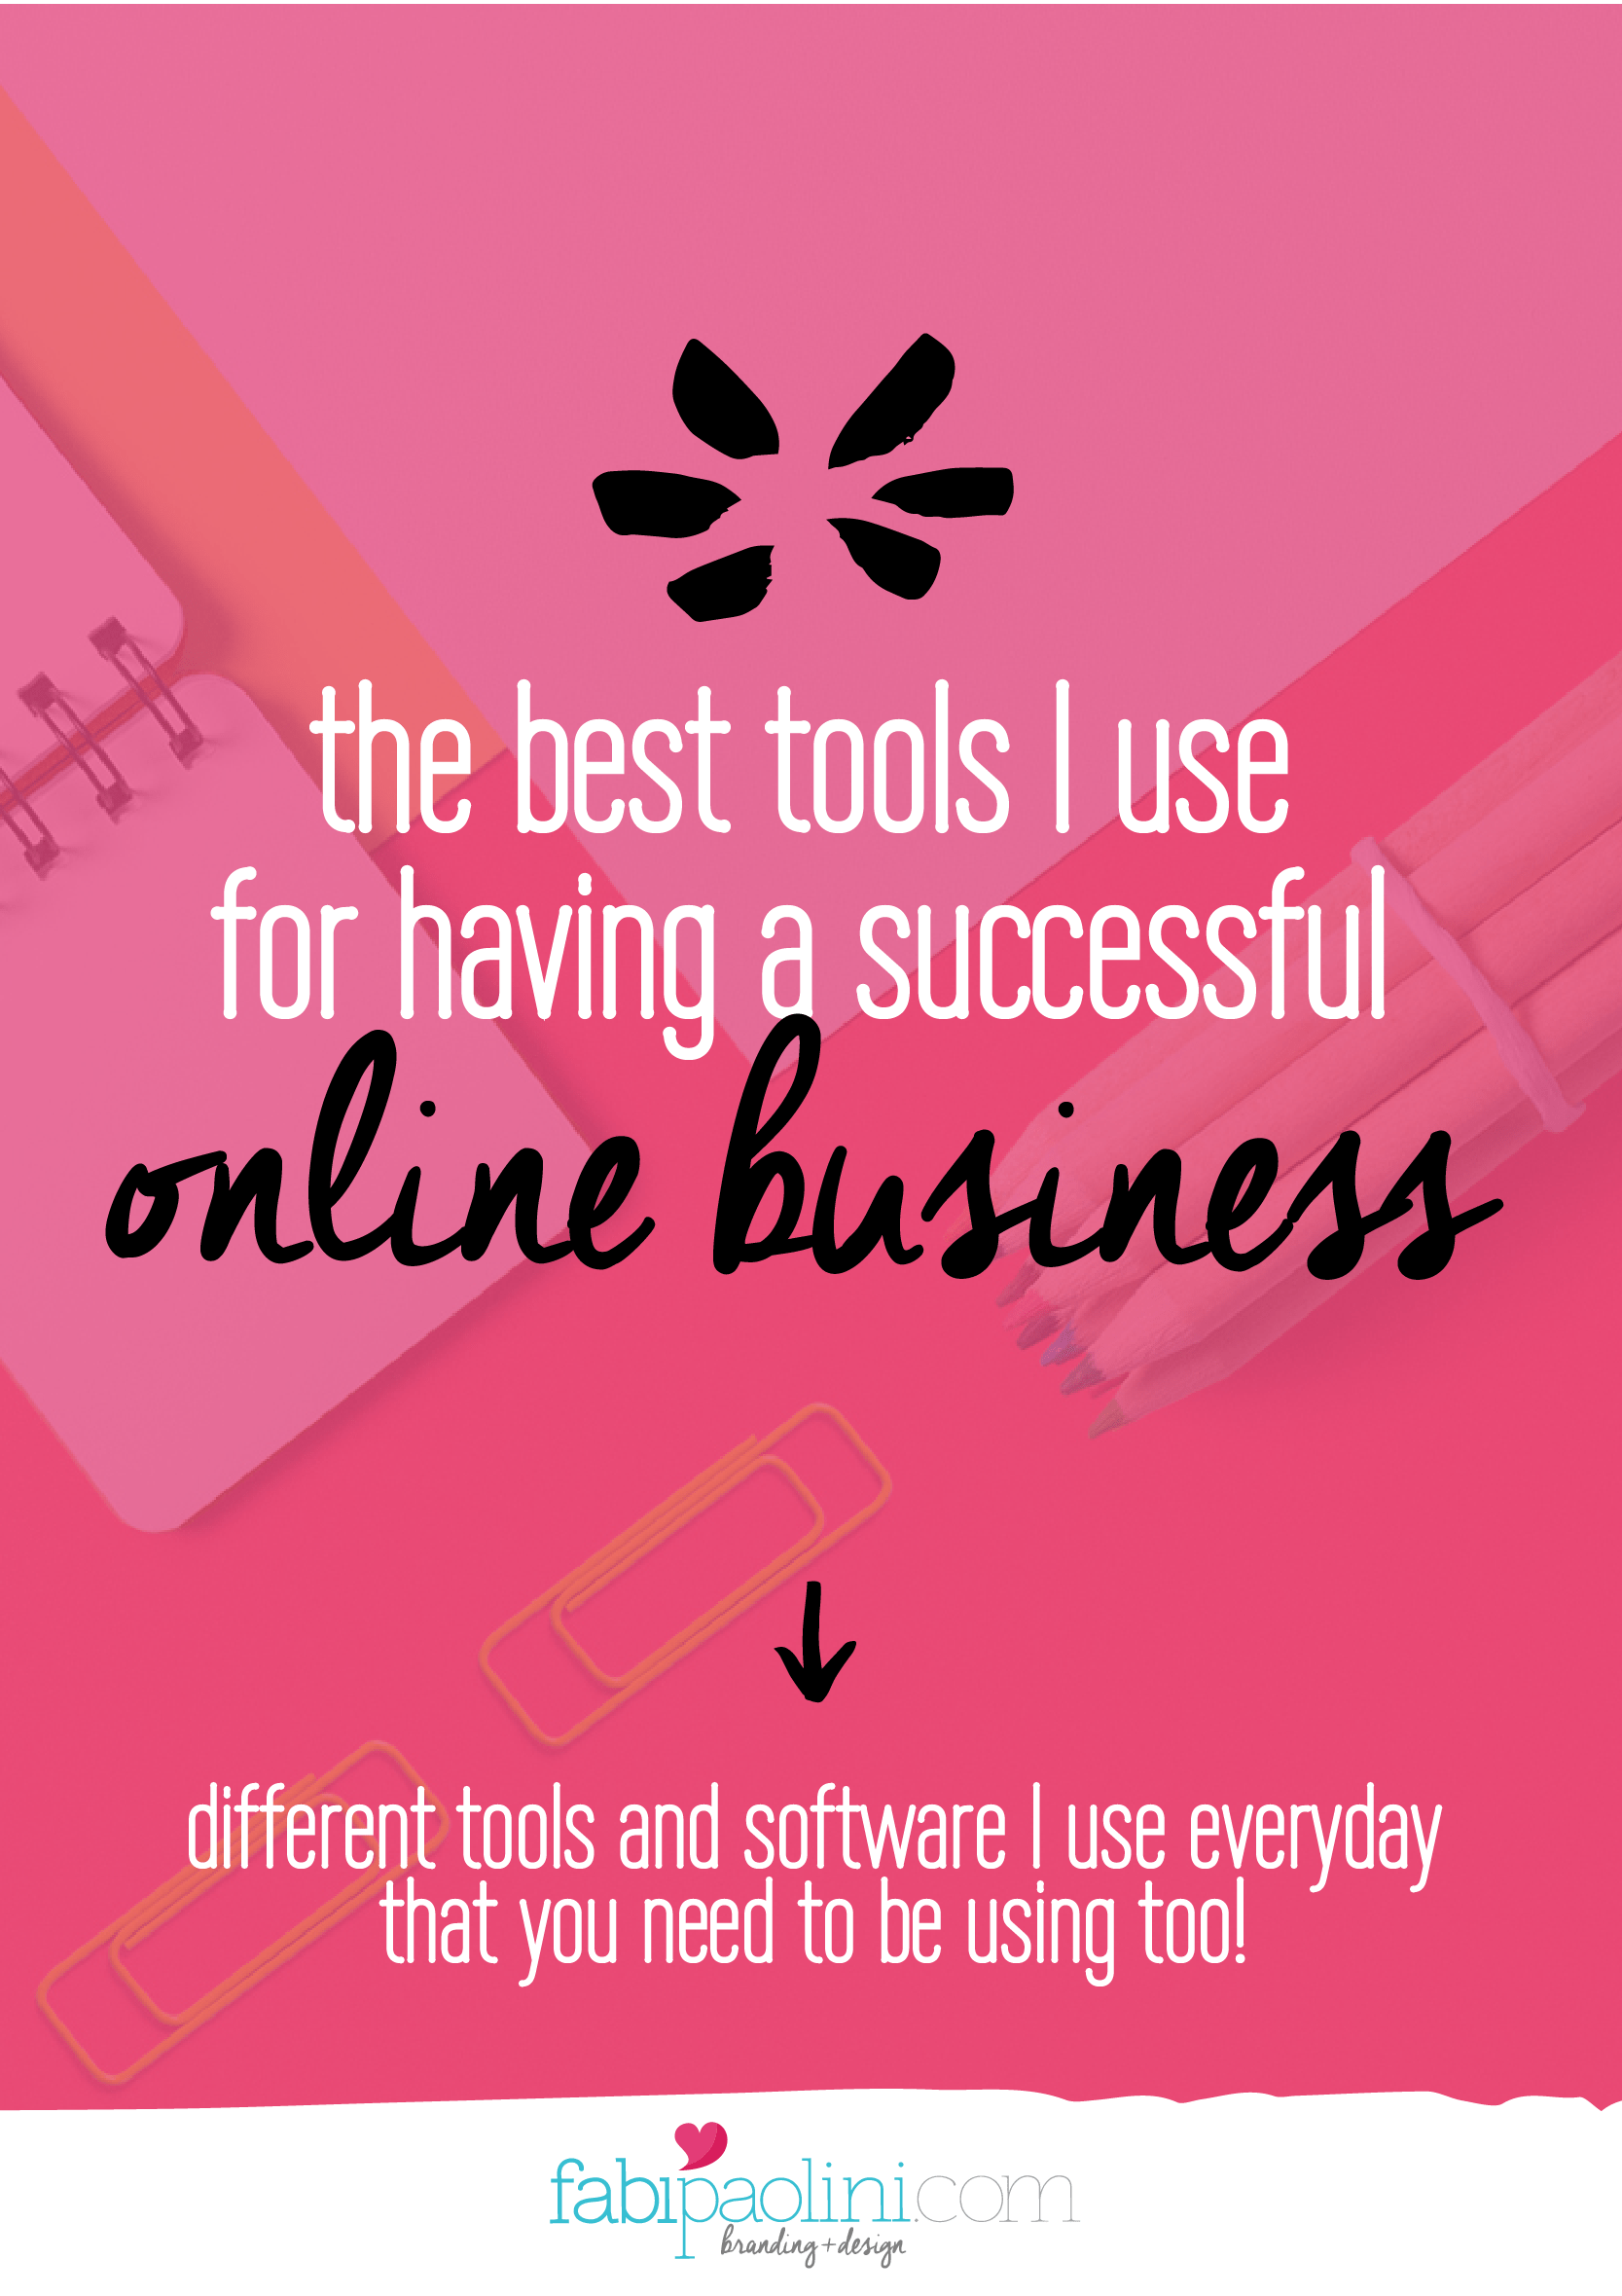 The best tools to have an online business for entrepreneurs and small business owners. 